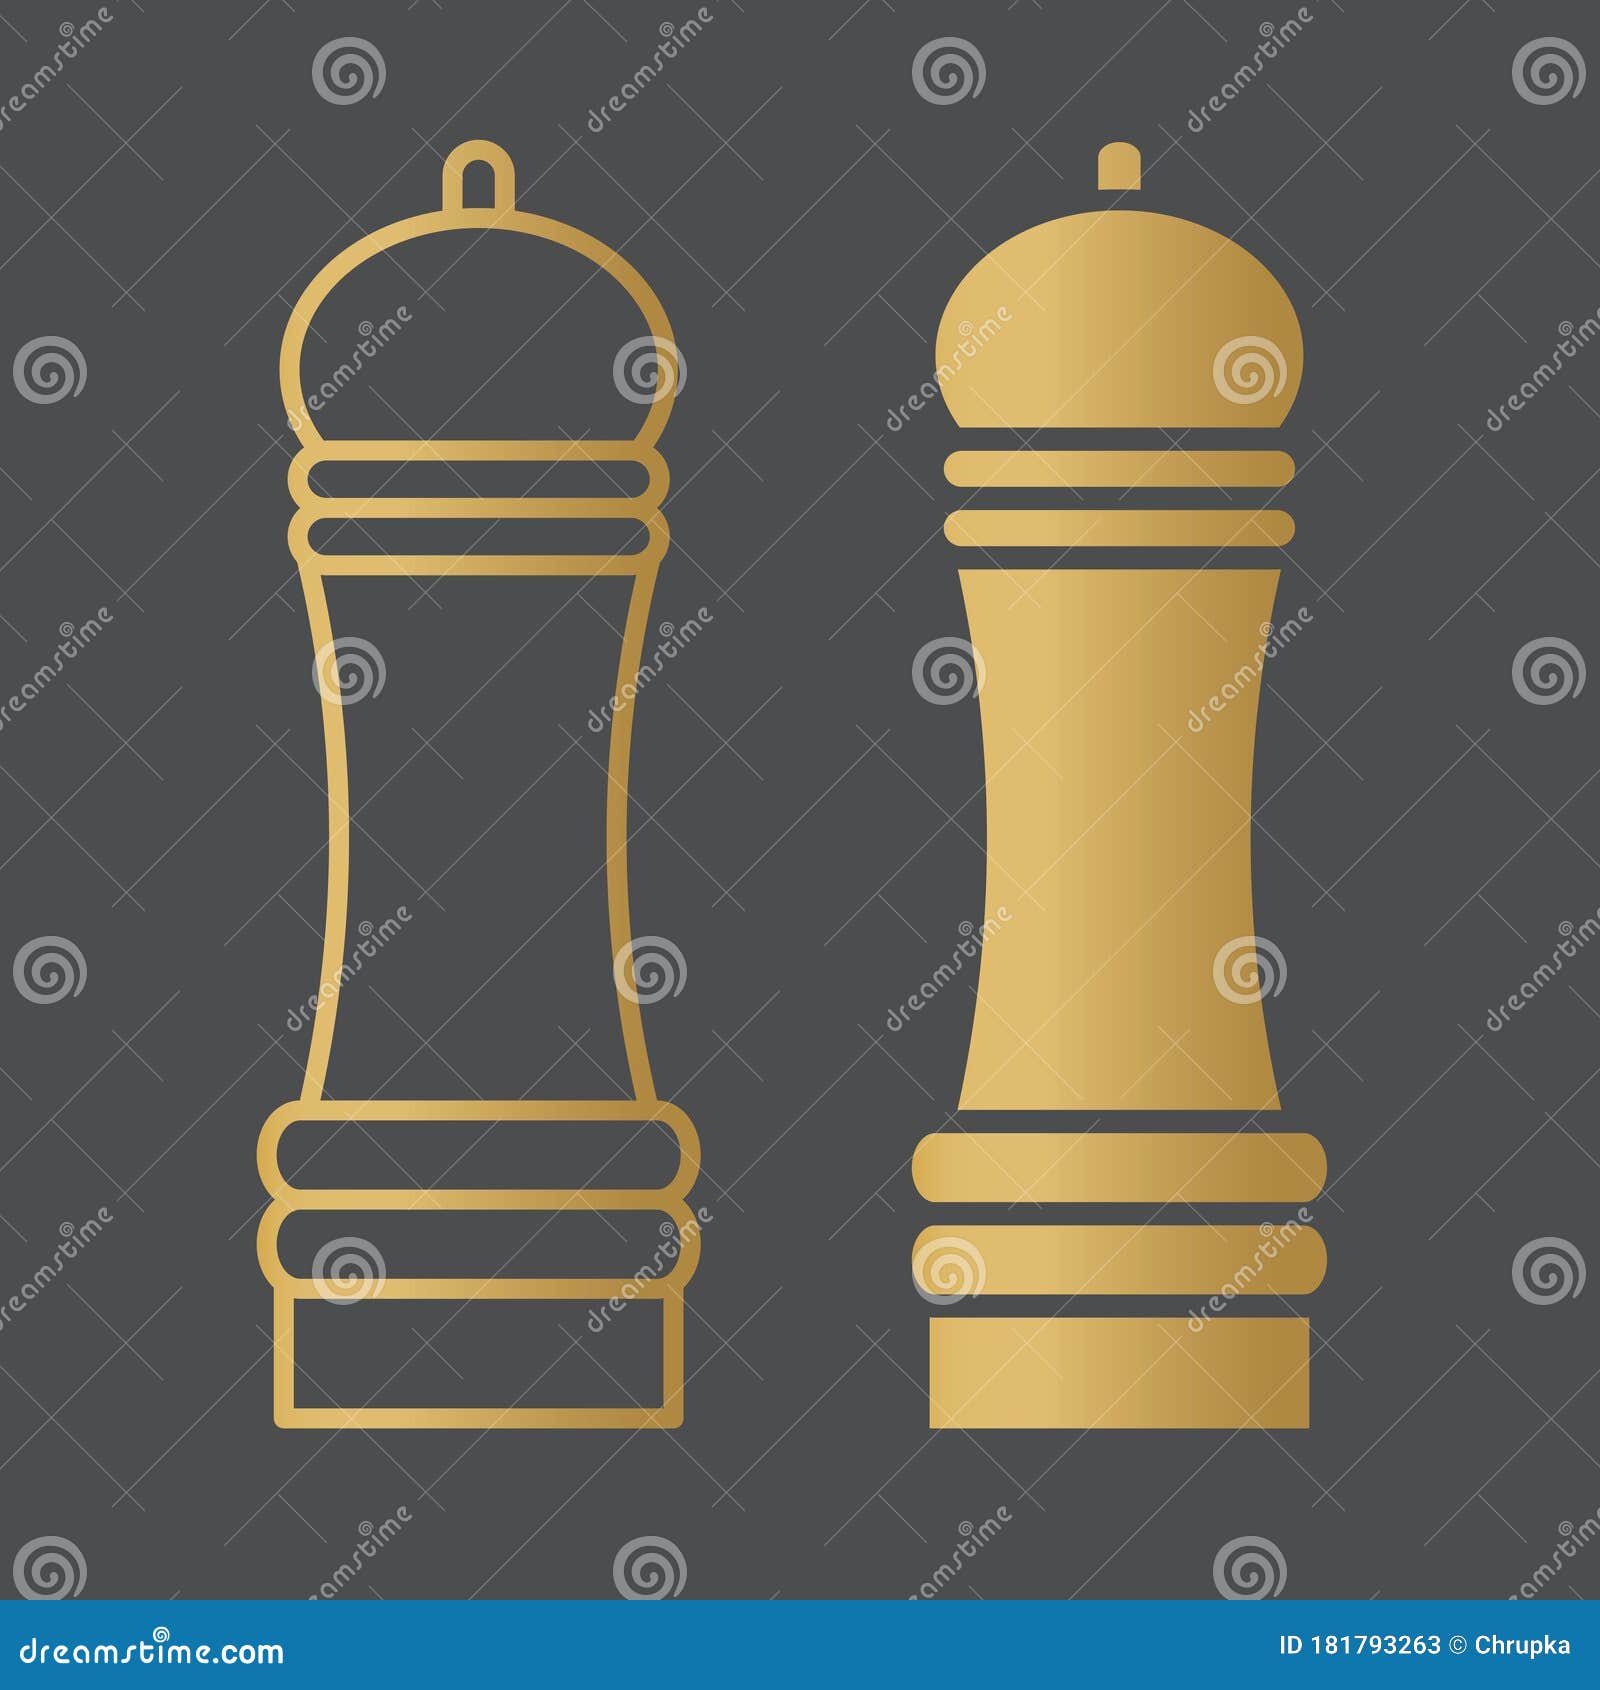 Download Pepper Mill Stock Illustrations 1 064 Pepper Mill Stock Illustrations Vectors Clipart Dreamstime Yellowimages Mockups